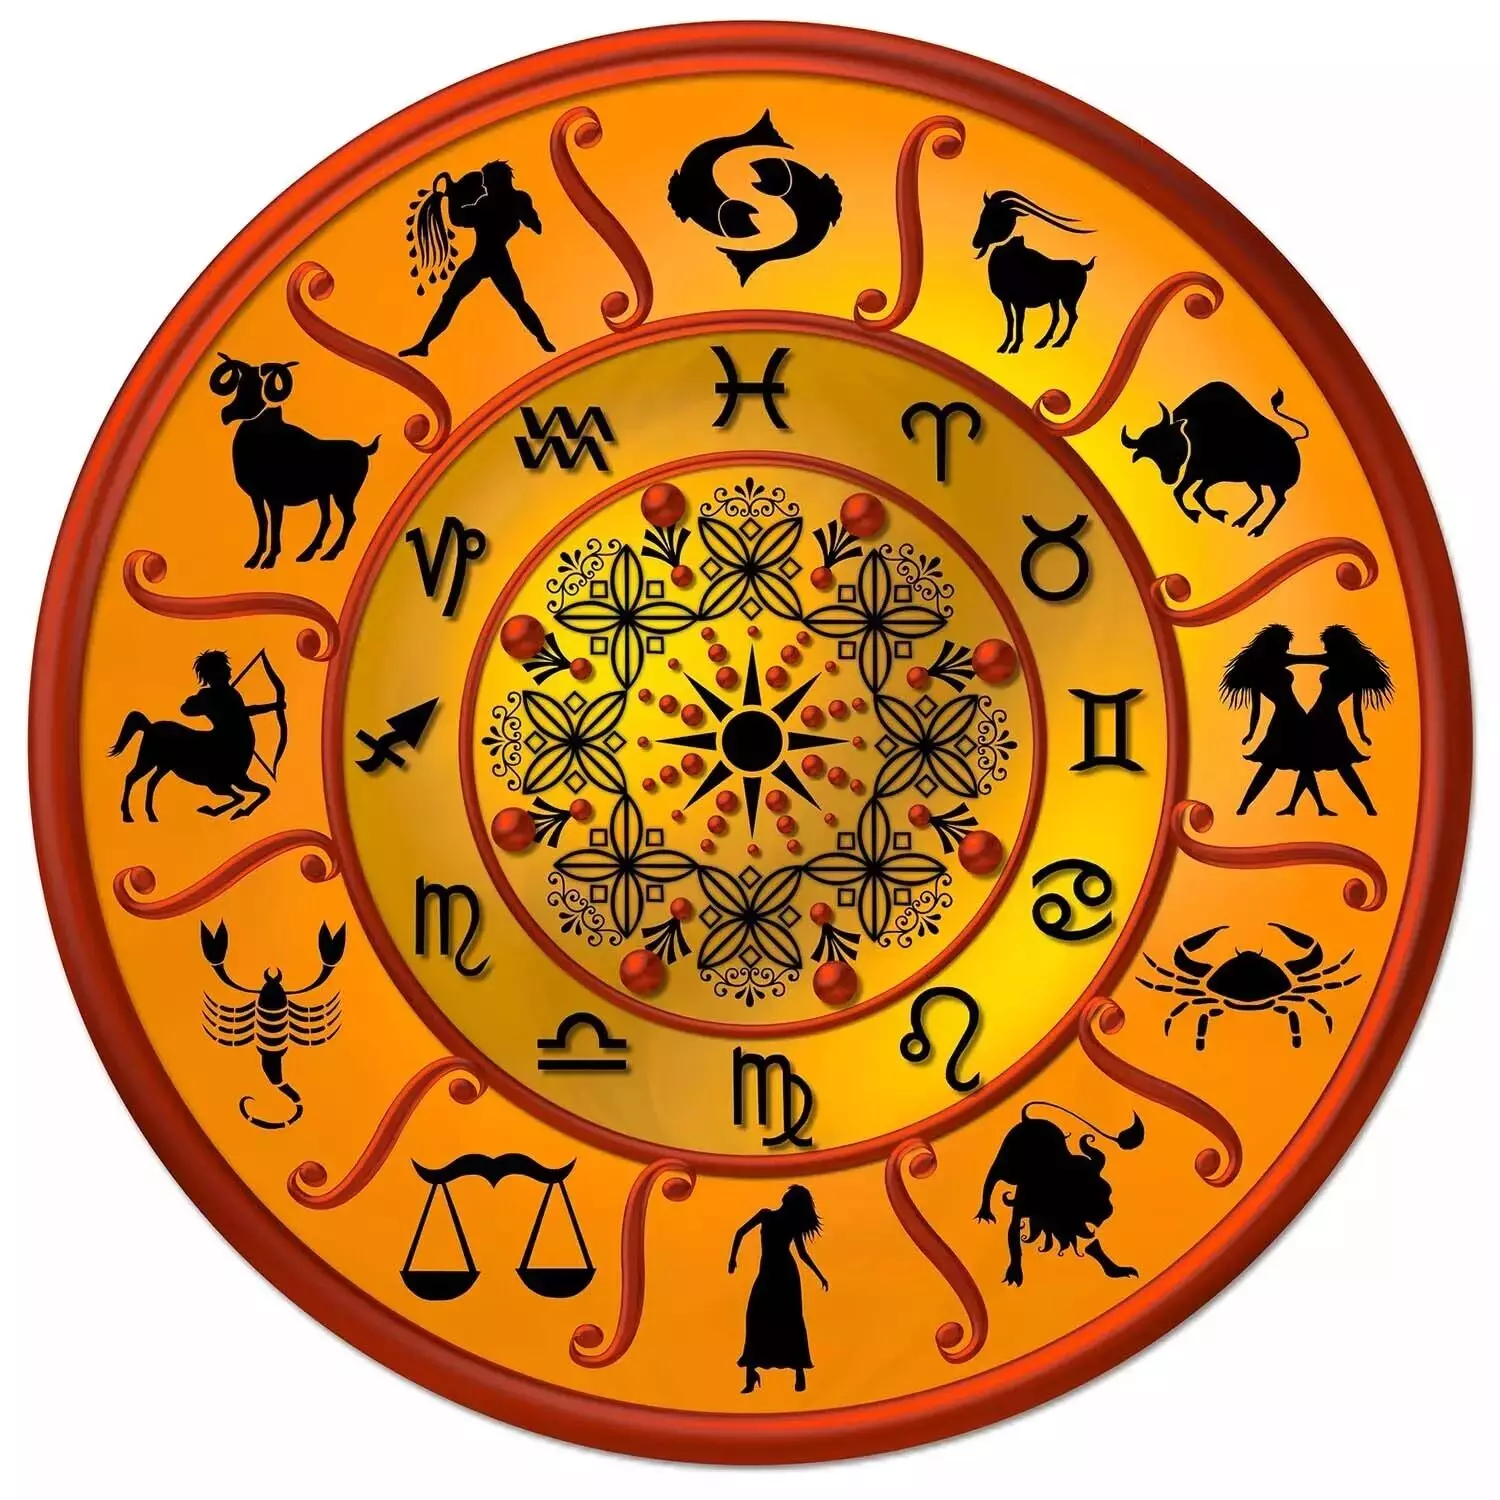 21 January – Know your todays horoscope